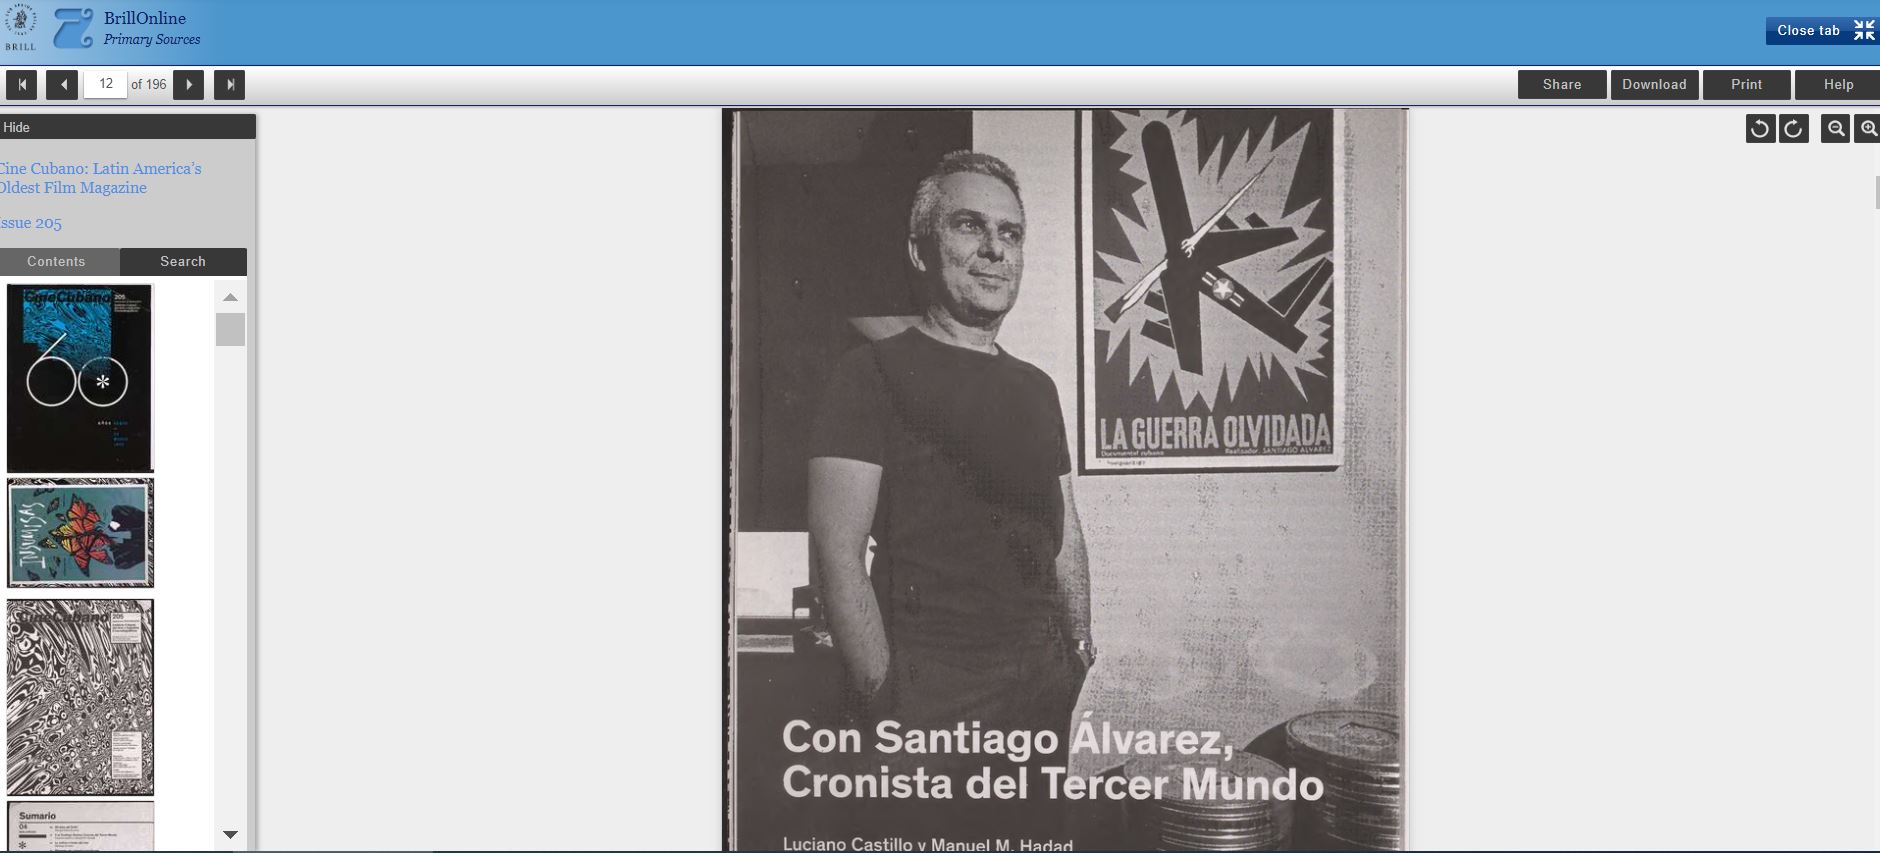 The landing page of a 2019 issue number 205 of the Cuban movie journal Cine Cubano.